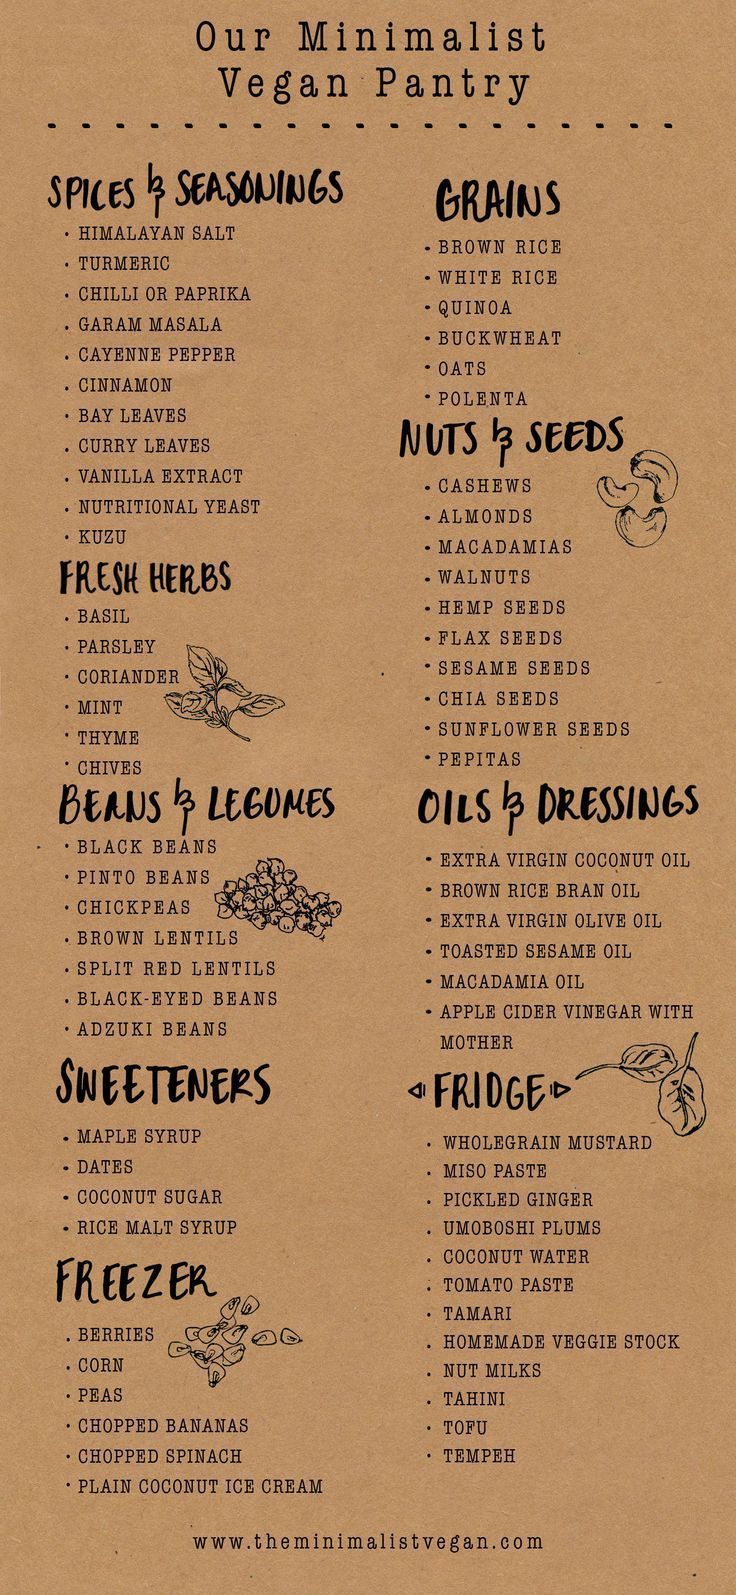 Our Minimalist Vegan Pantry: Infographic -   24 diet inspiration grocery lists
 ideas